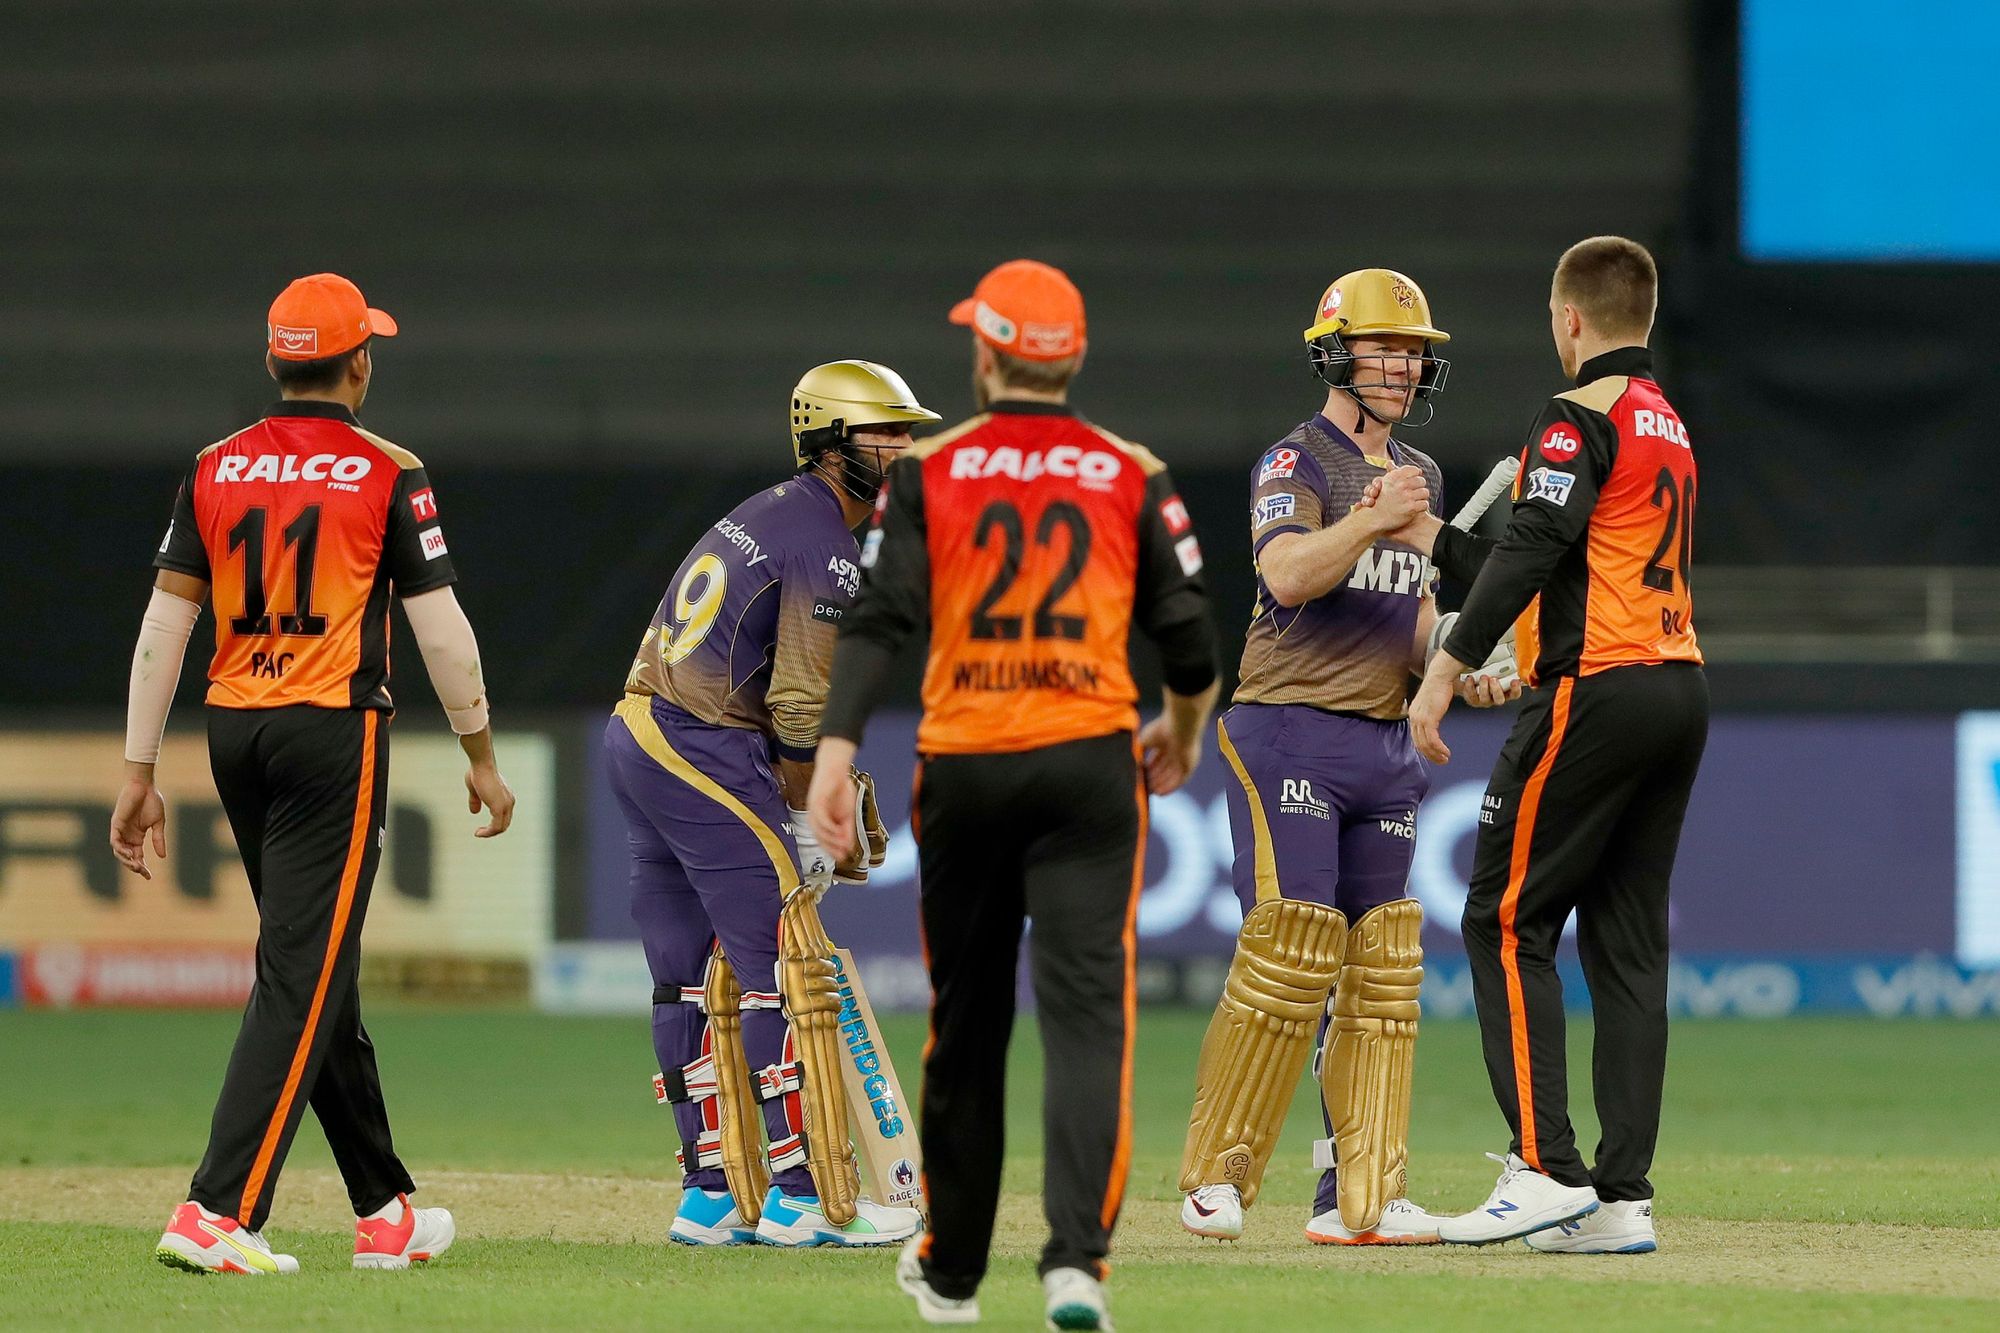 KKR chased down SRH's 116 with 2 balls to spare | BCCI/IPL